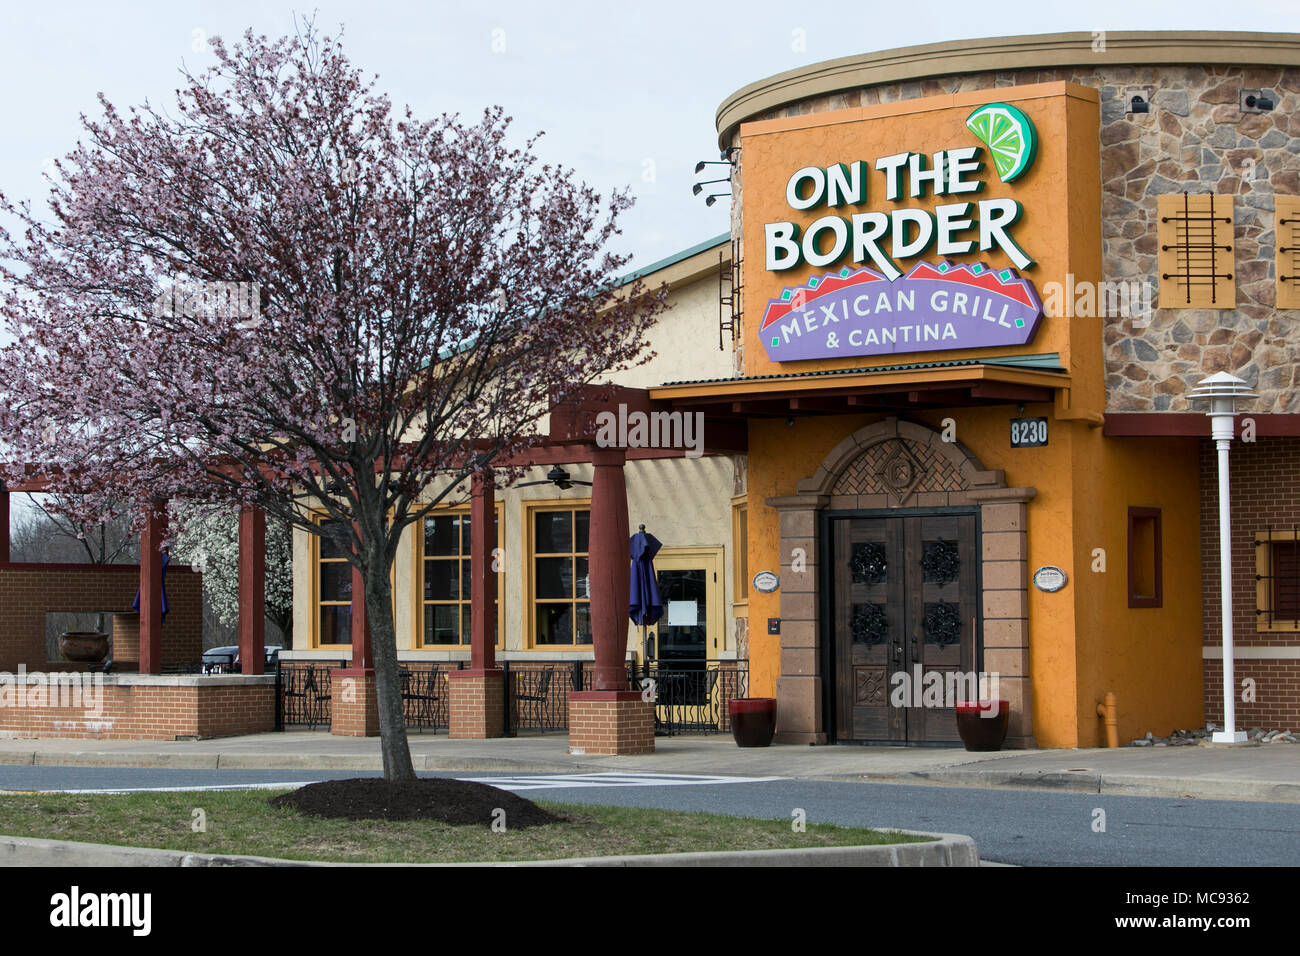 A logo sign outside of a On The Border Mexican Grill & Cantina restaurant location in Columbia, Maryland on April 13, 2018. Stock Photo